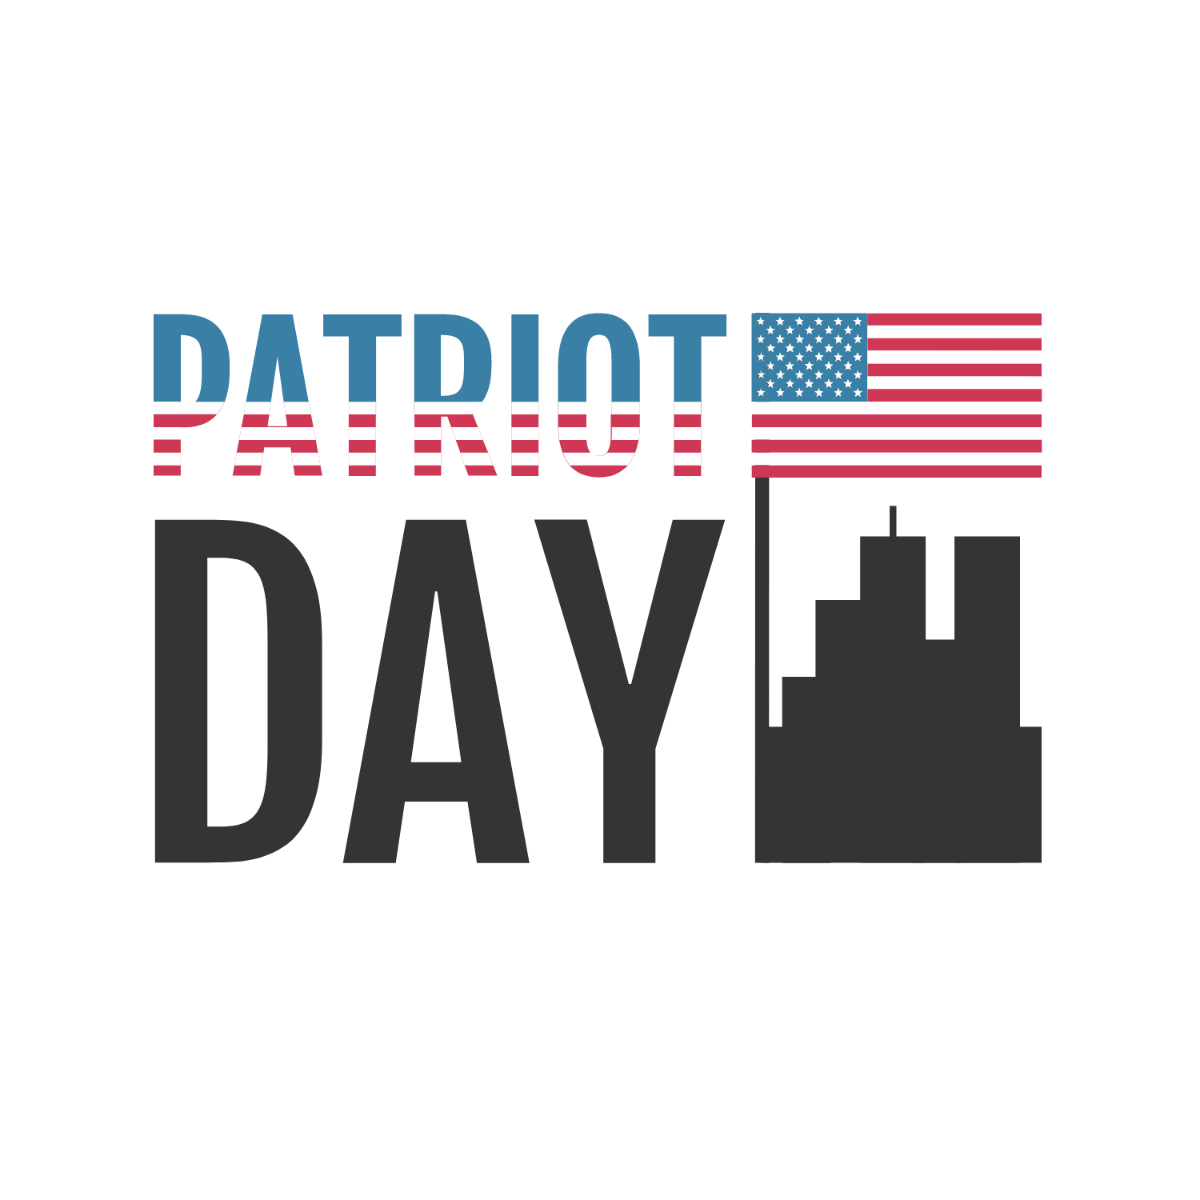 Patriots' Day Graphic Vector Template